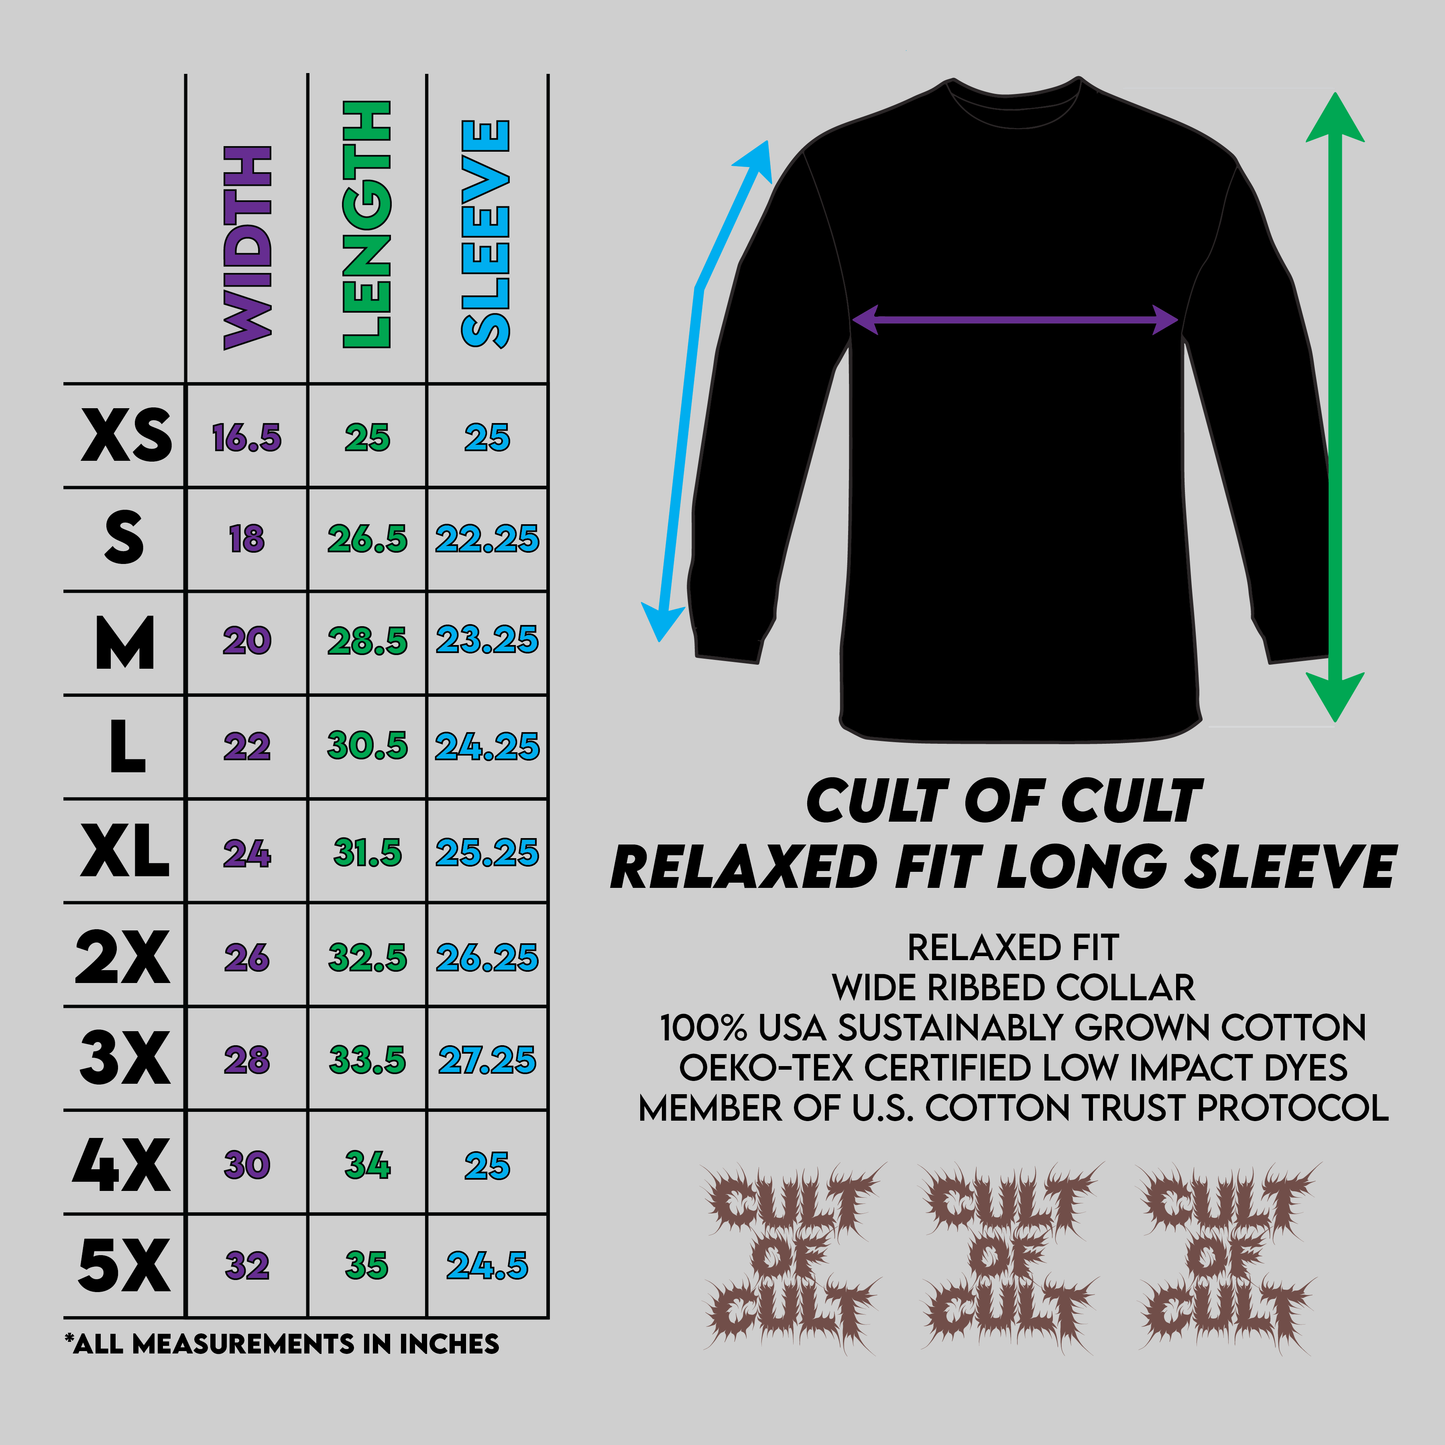 This is a sizing chart showing the shirt width, length, and sleeve length of all sizing options for long sleeve shirts.